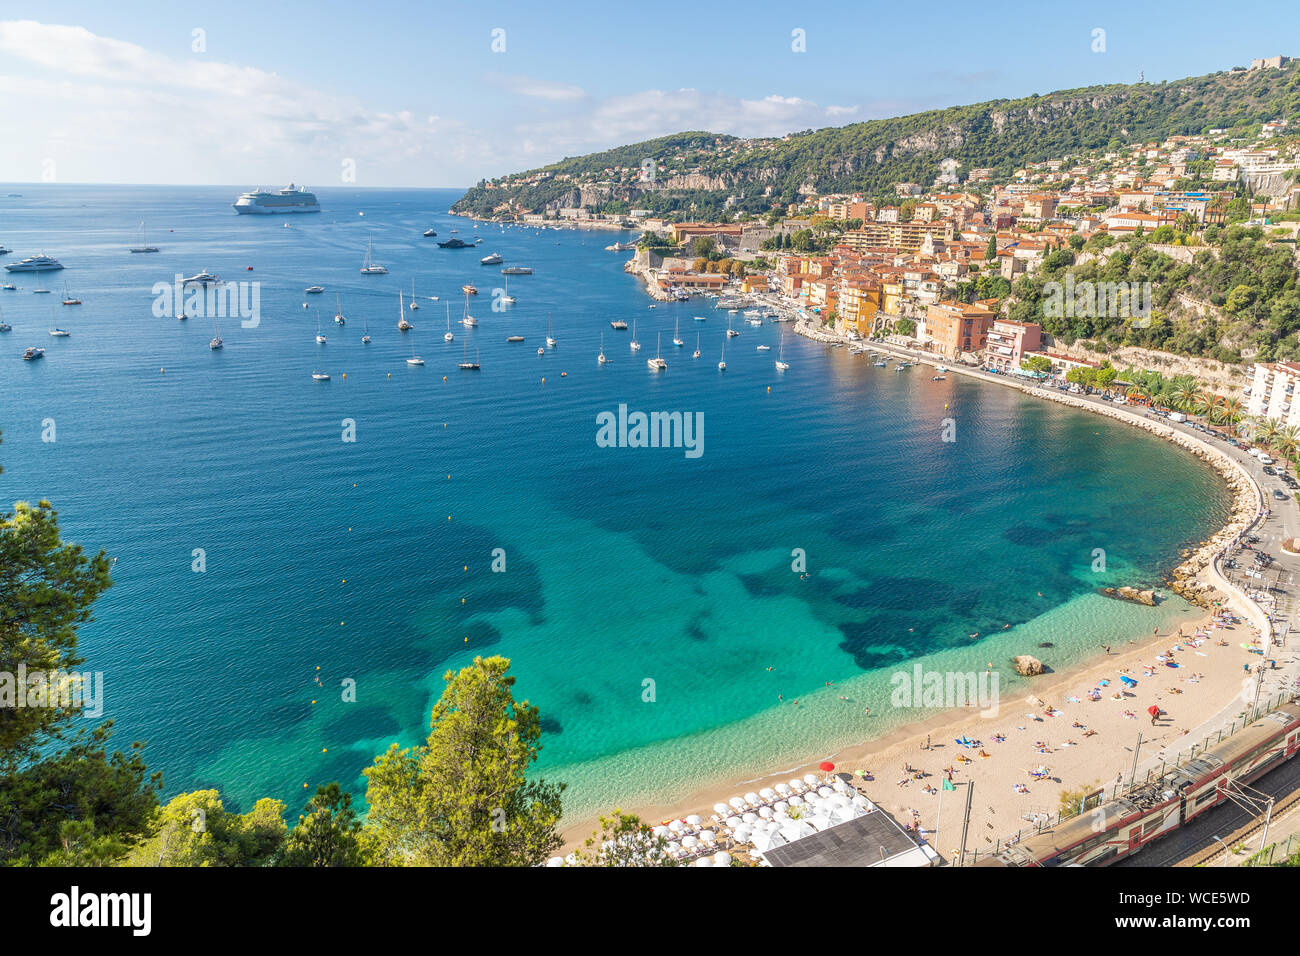 The viewpoint overlooking Villefranche-sur-Mer in the South of France Stock Photo